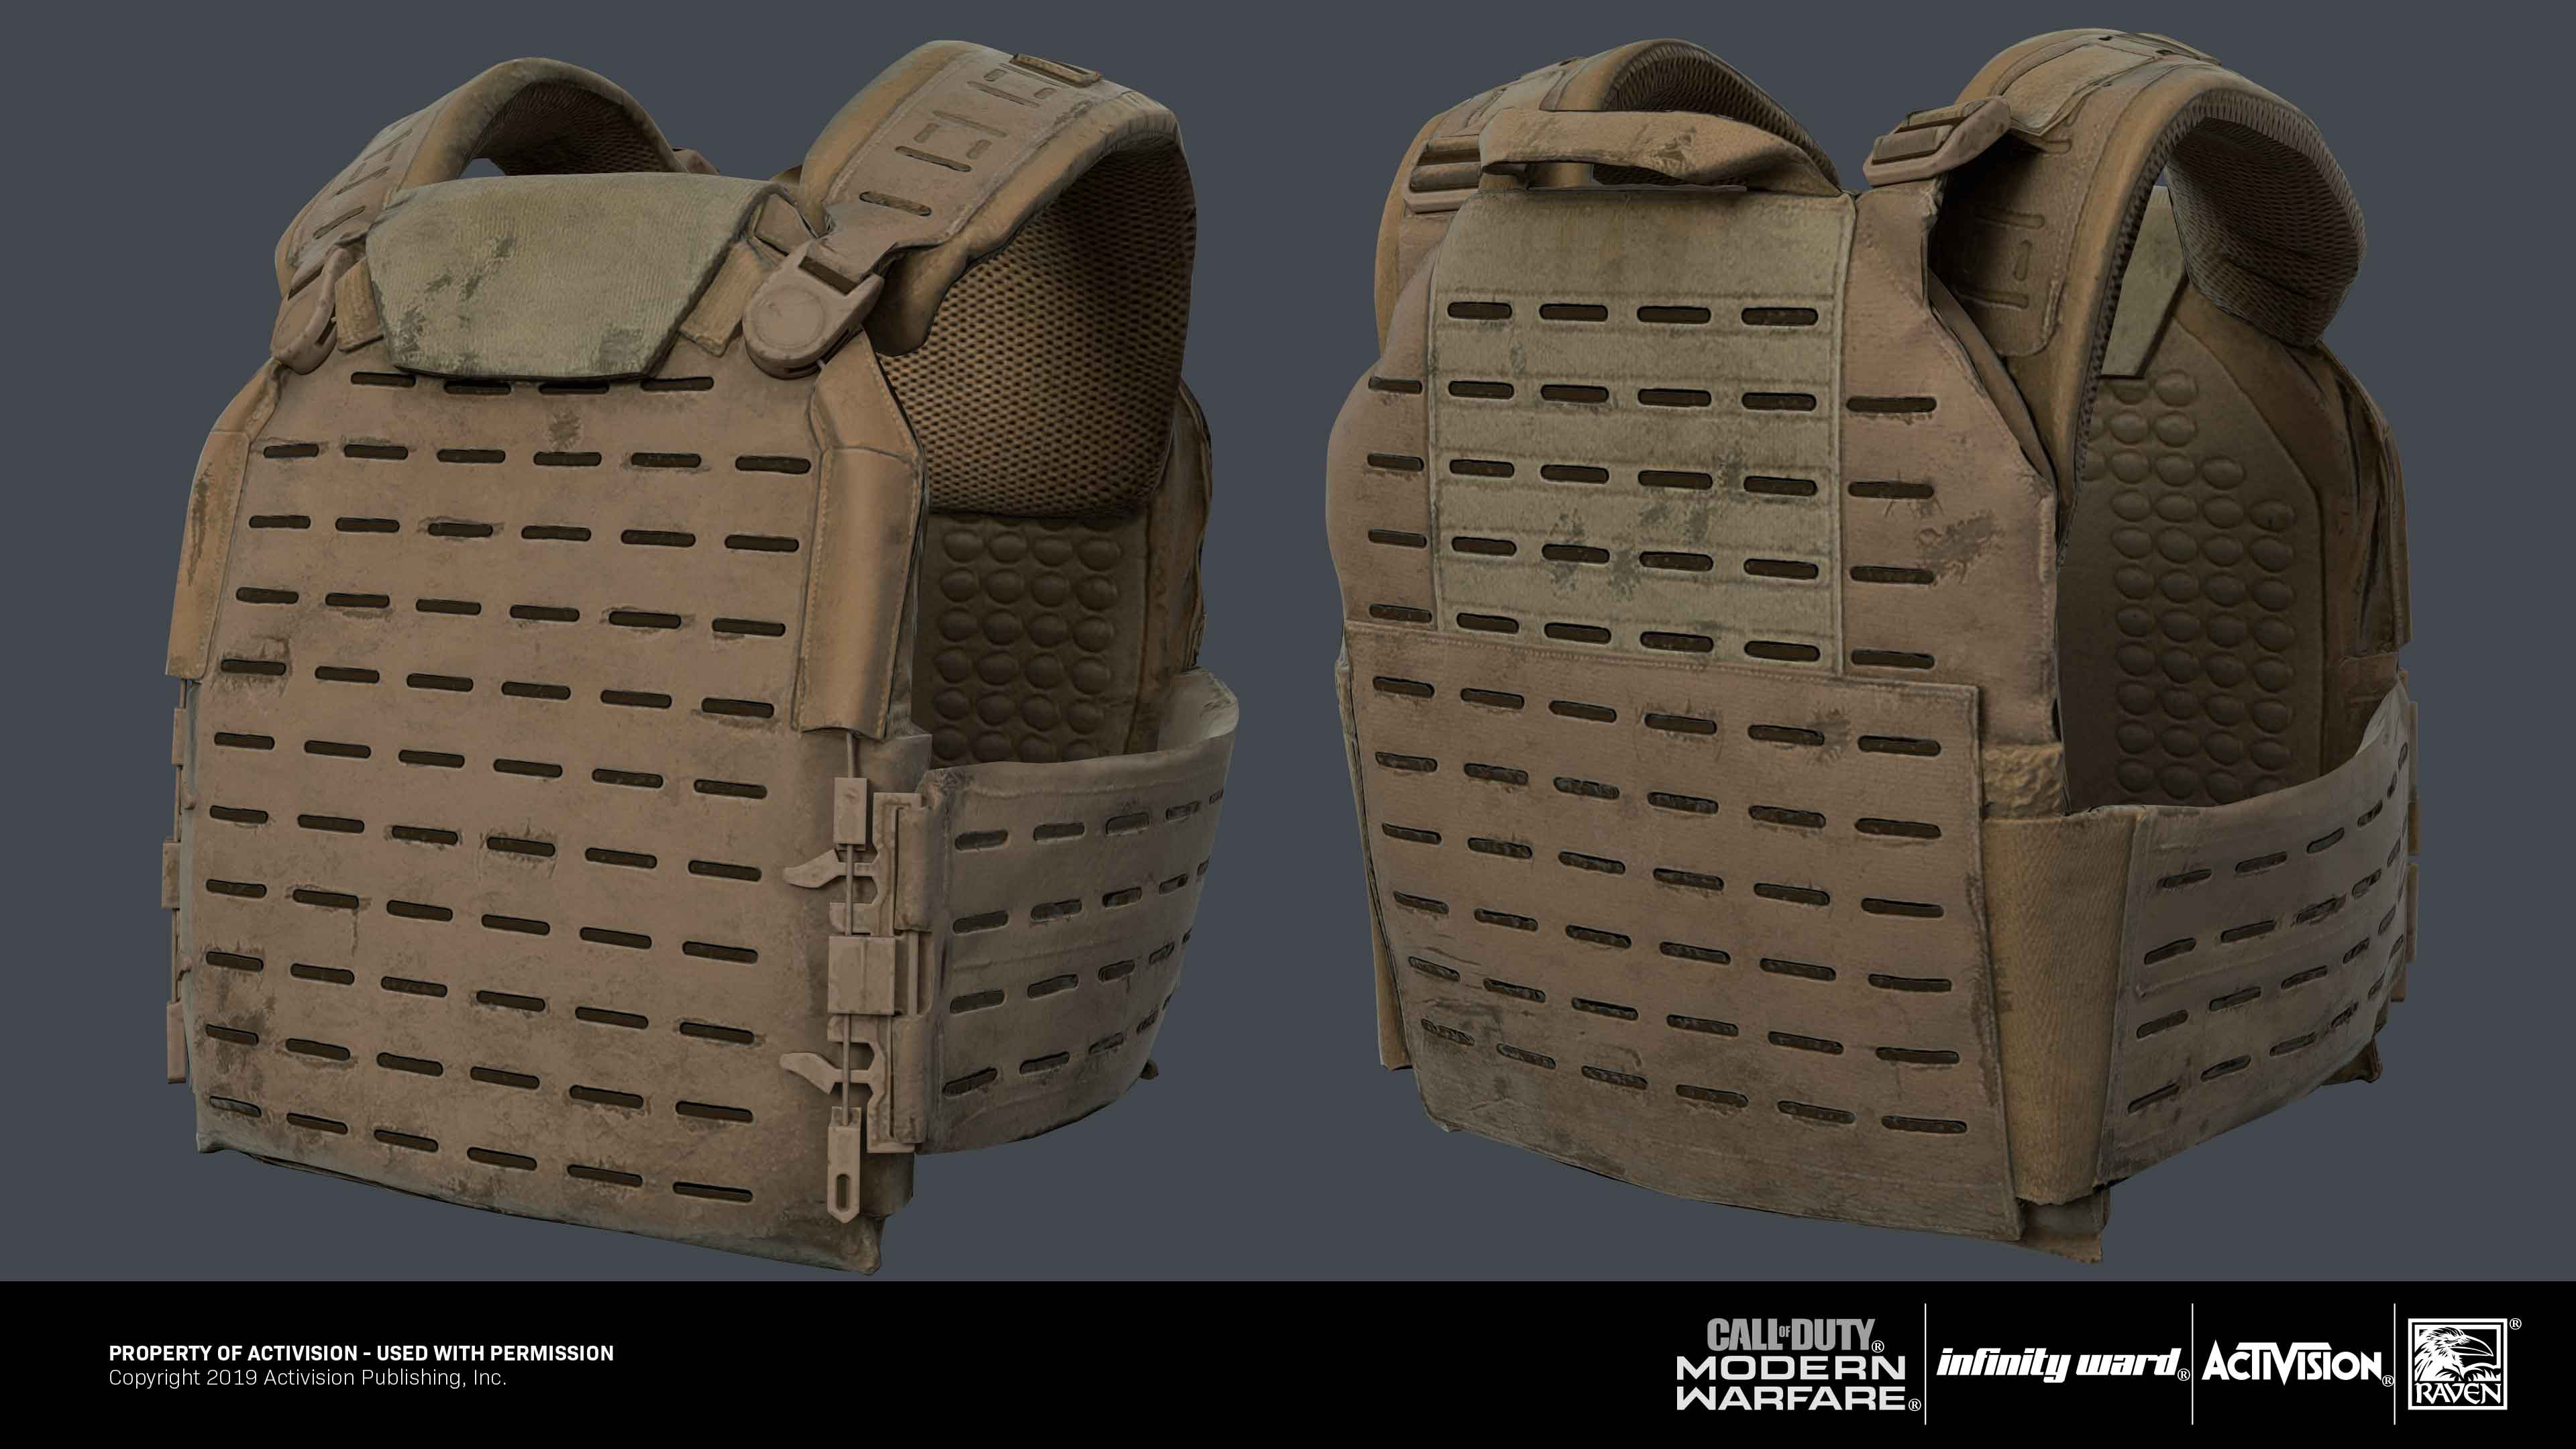 Body armour: Highpoly/ scan cleanup, lowpoly, bakes and textures/ cleanup. 